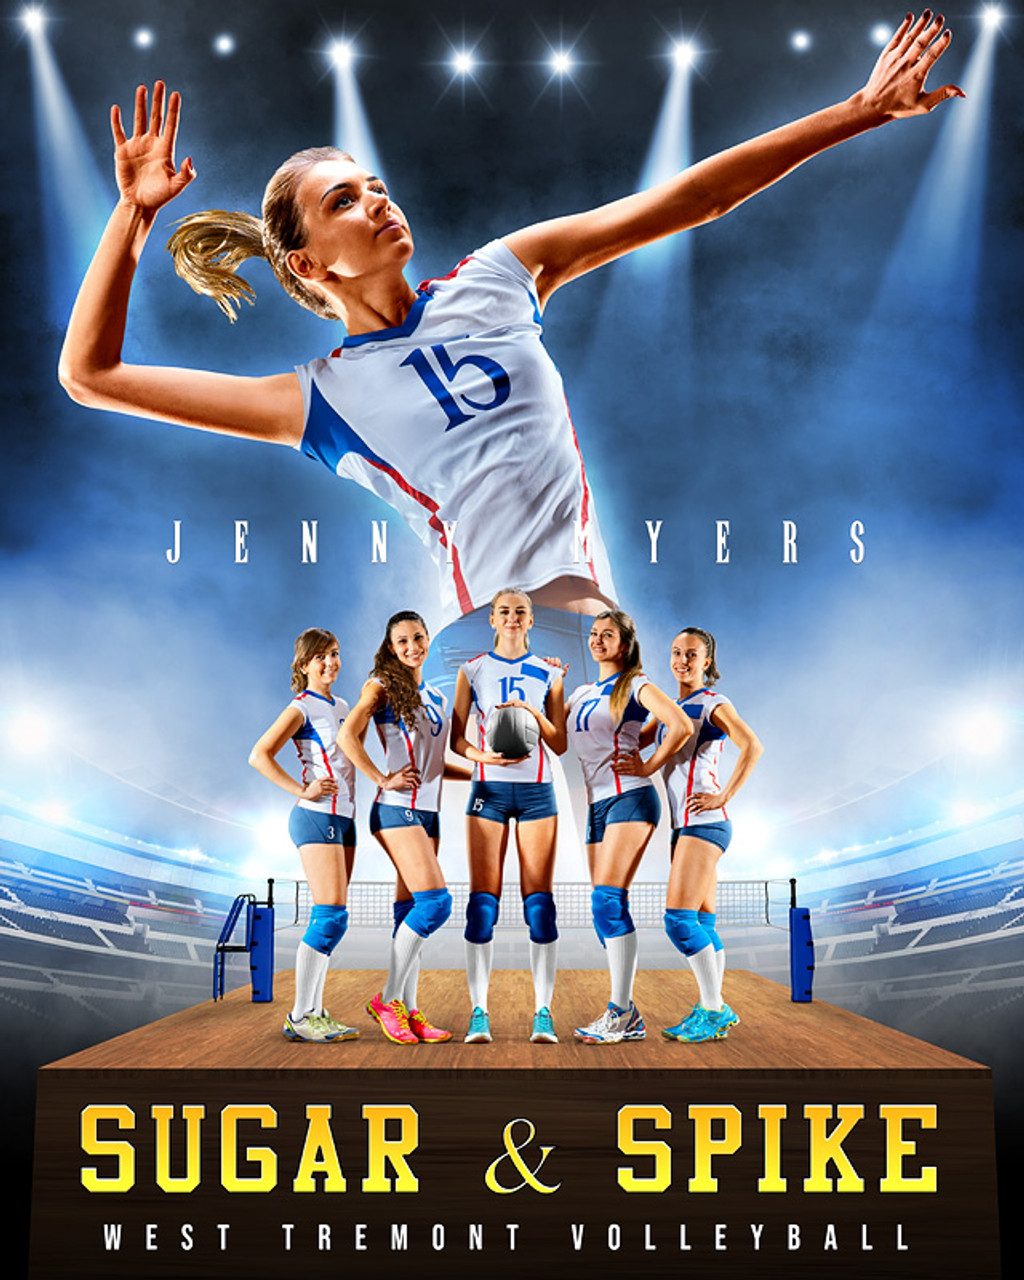 16x20 SPORTS POSTER PHOTO TEMPLATE - VOLLEYBALL UPRISE - CUSTOM PHOTOSHOP LAYERED SPORTS TEMPLATE